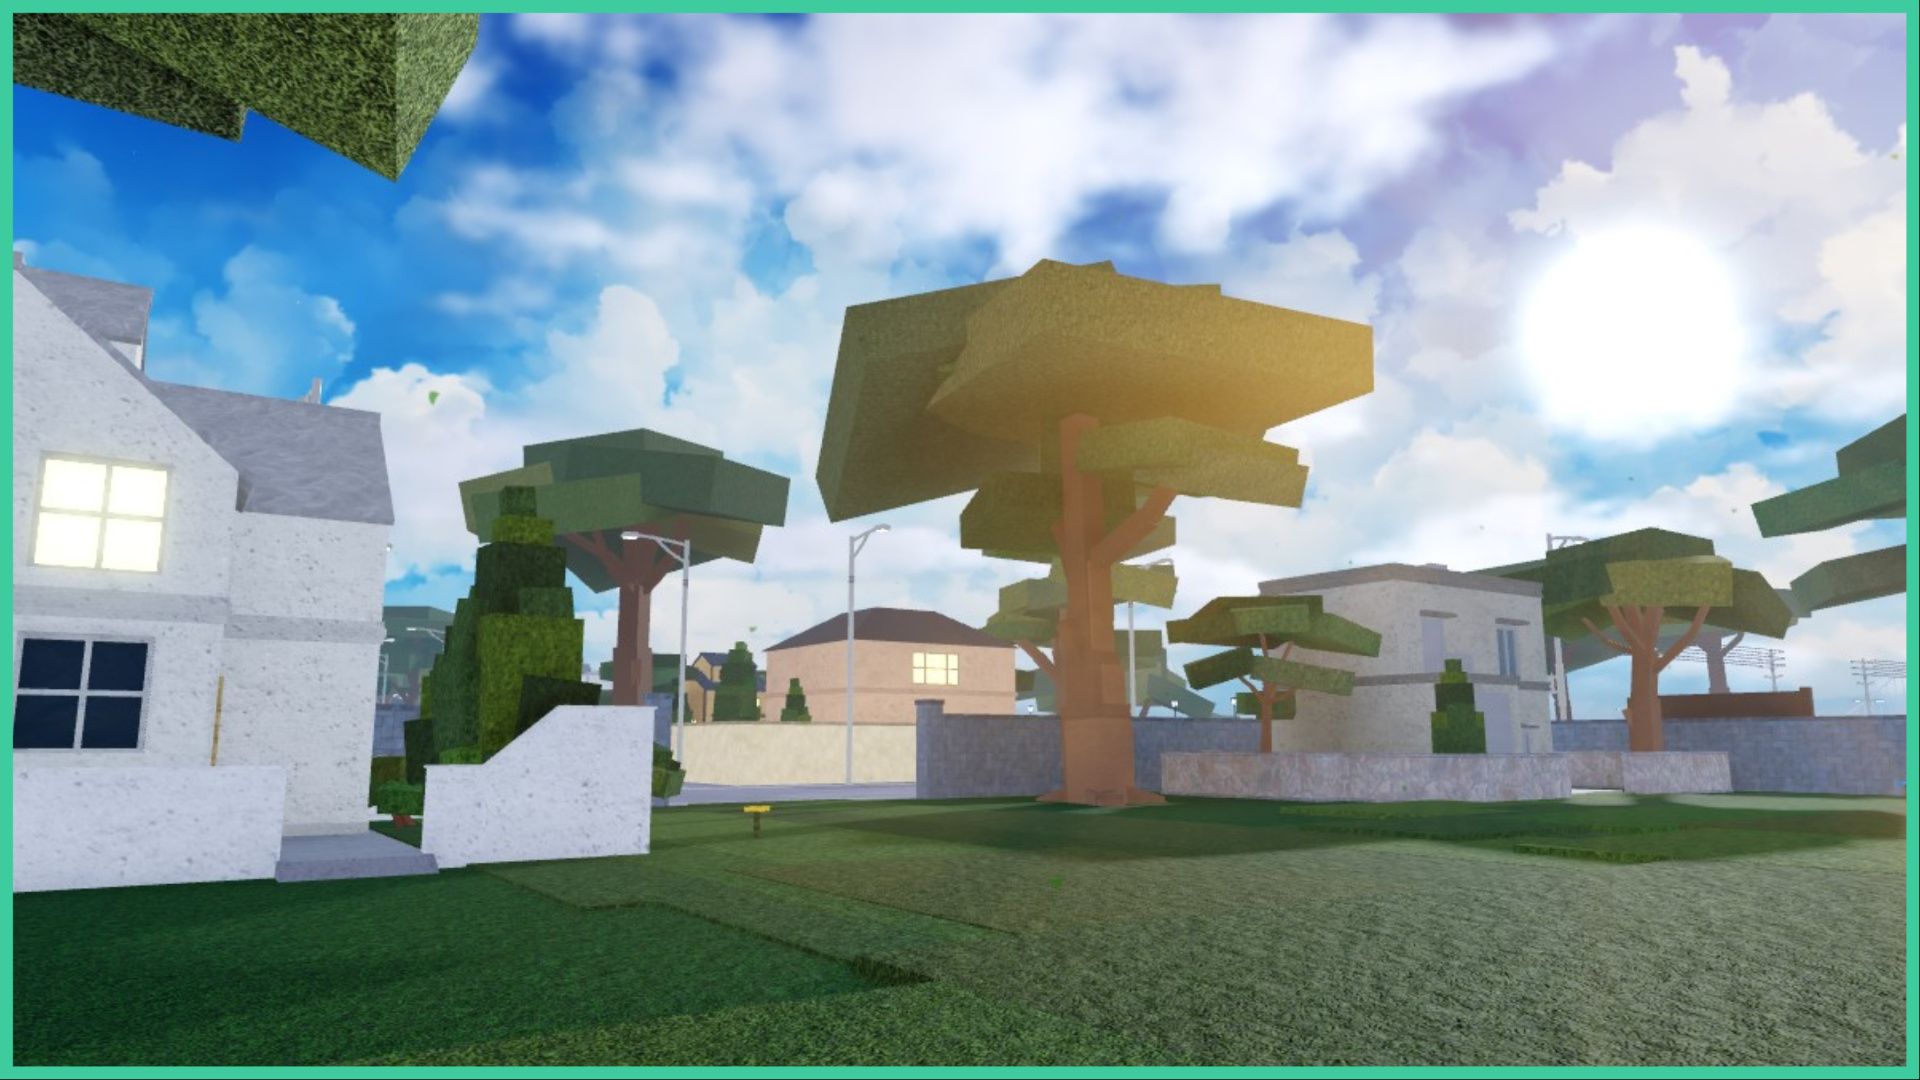 feature image for our type soul ink bankai guide, it's a screenshot of a housing area, with trees sprinkled throughout, multiple houses, with large patches of grass for gardens and a single flower, the clouds in the sky are drifting past as the large sun shines through them, there are street lamps dotted around the road